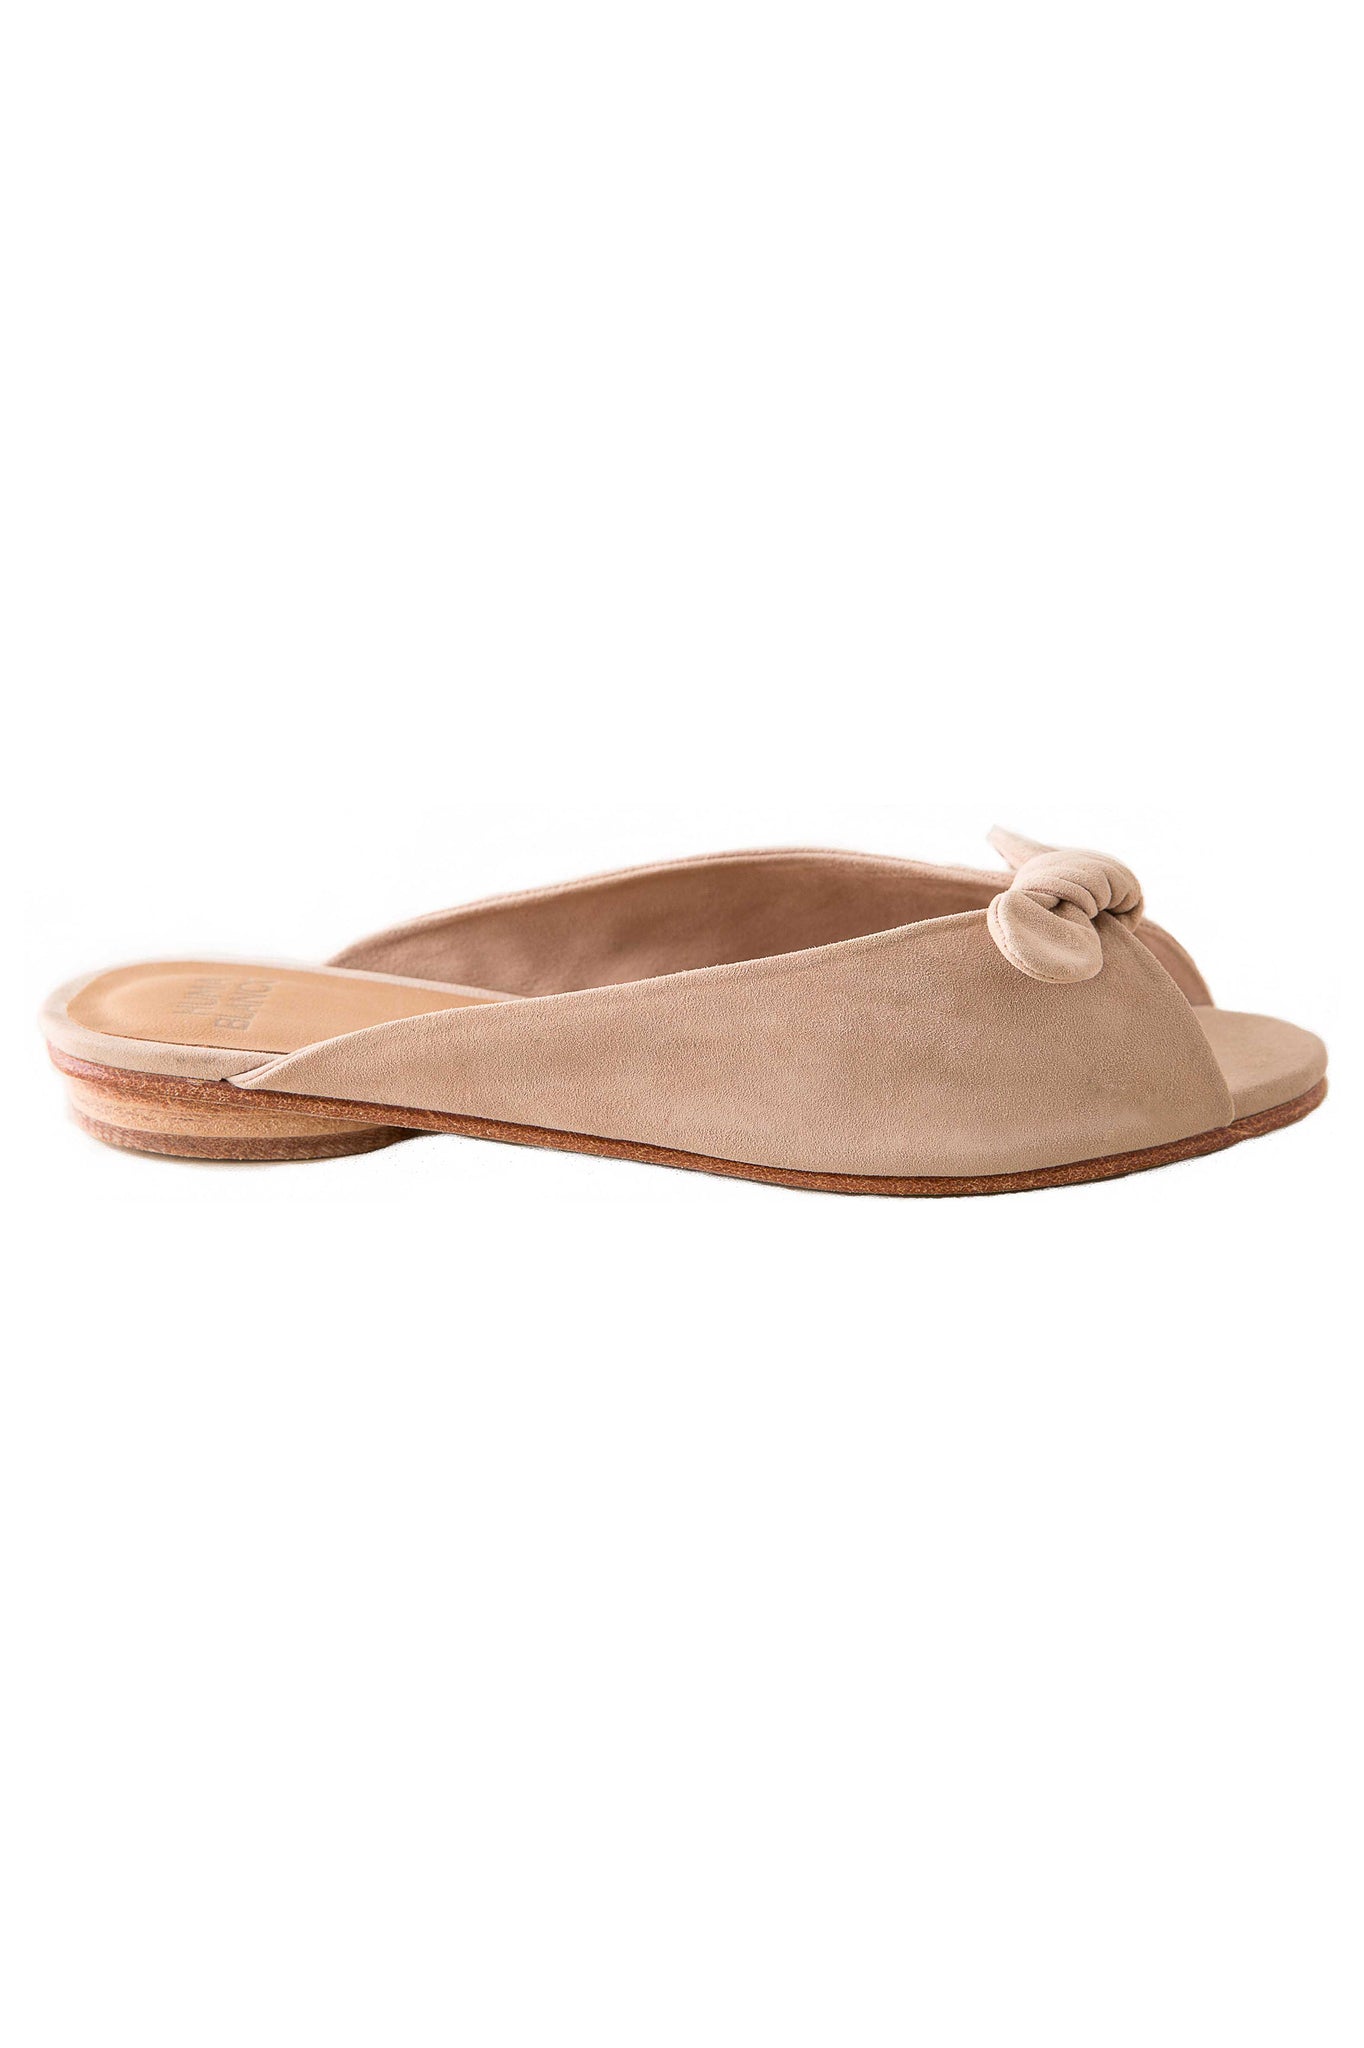 Huma Blanco Spring 2018 Nolita Mule. Knotted suede strap provides an impeccable finish for this handcrafted open toe mule slide sandal. Open toe slide in soft suede with bowtie detail. Feminine and easy to style with everything from dresses to denim. Made by hand in Peru. Color nude. Suede upper, leather insole, leather lining, leather sole, and wood heel with rubber sole. Leather insole with leather heel. Heel height: 0.5". Sizes 37 38 39.